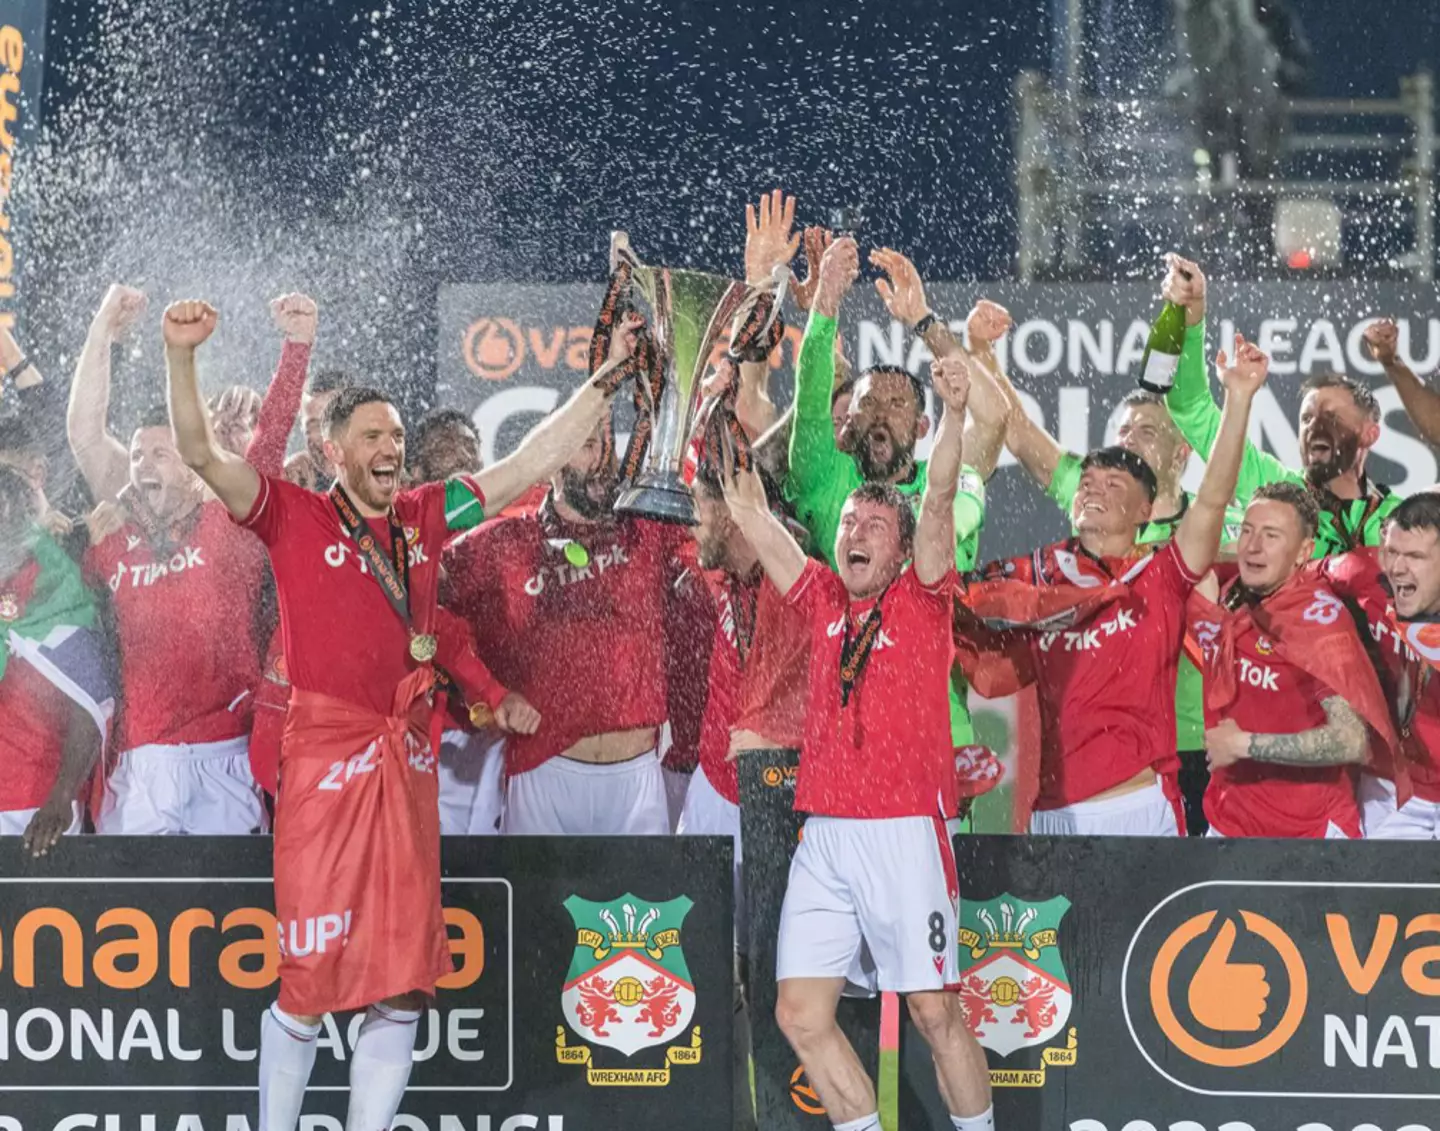 Wrexham secured promotion to League 2 last weekend.